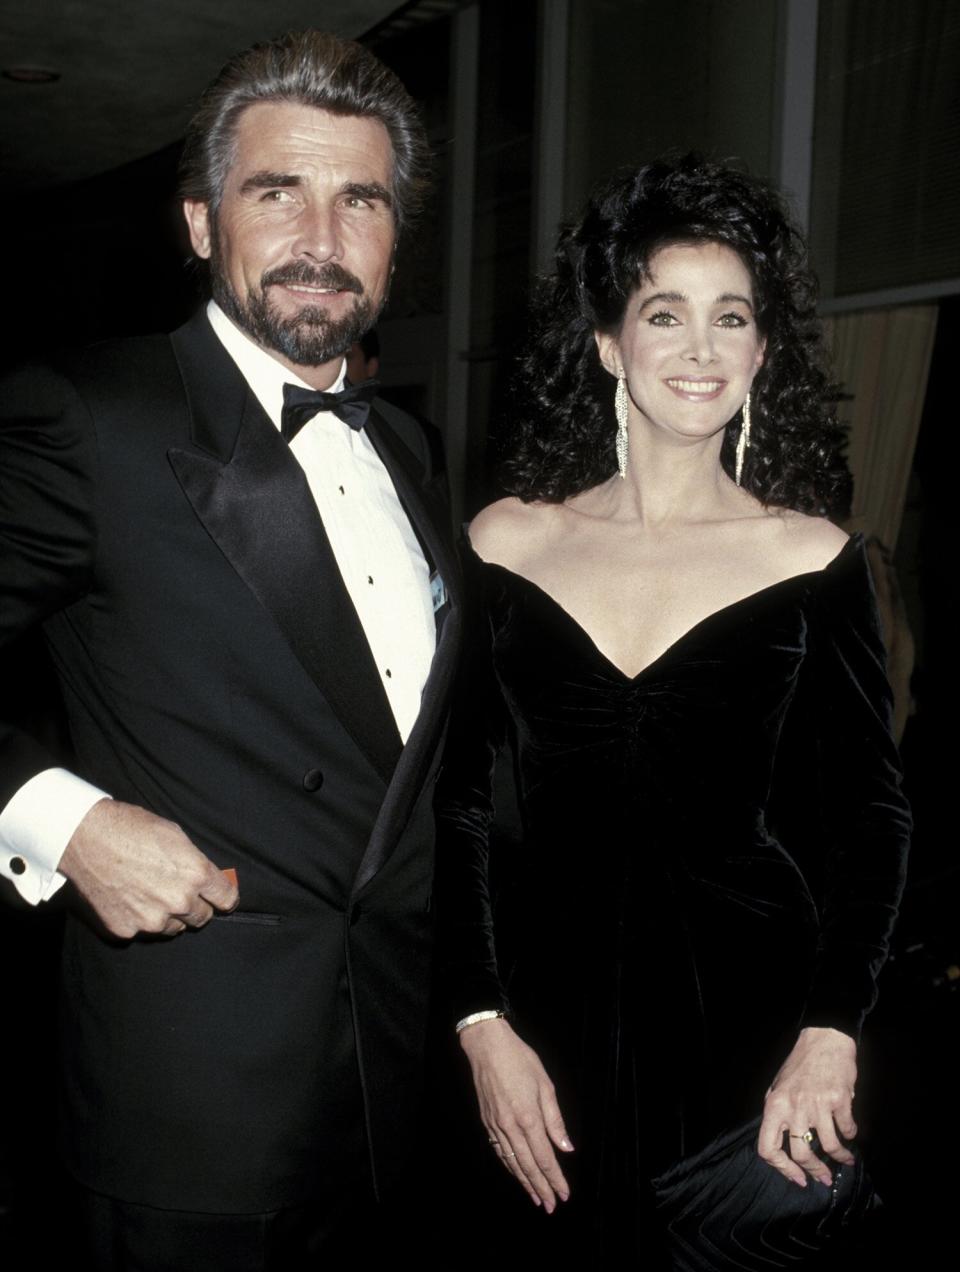 James Brolin and Connie Sellecca during The 44th Annual Golden Globe Awards